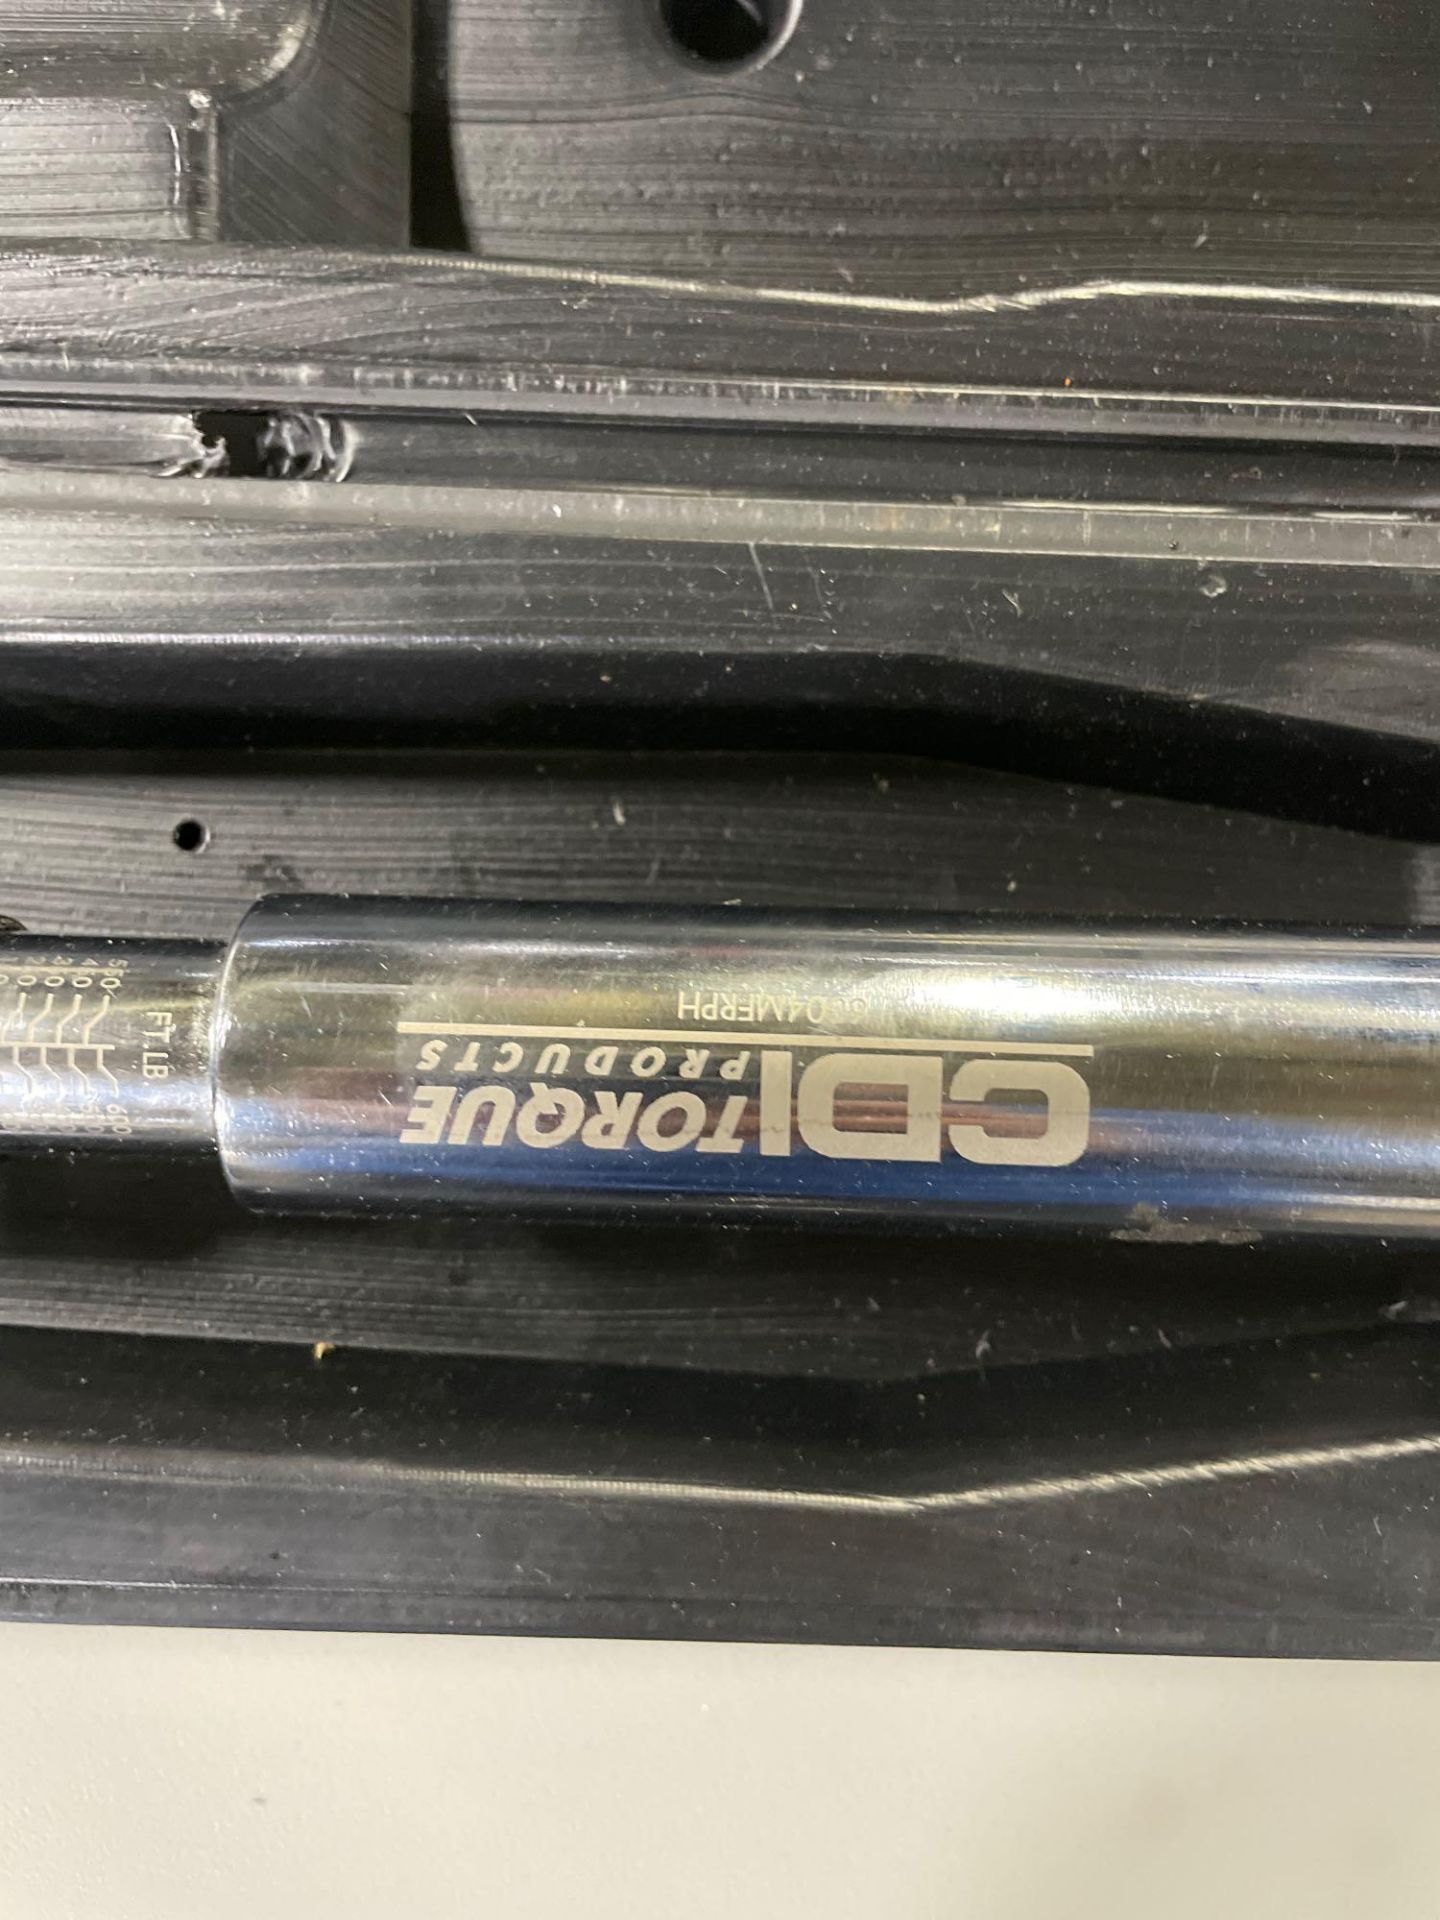 CDI torque wrench